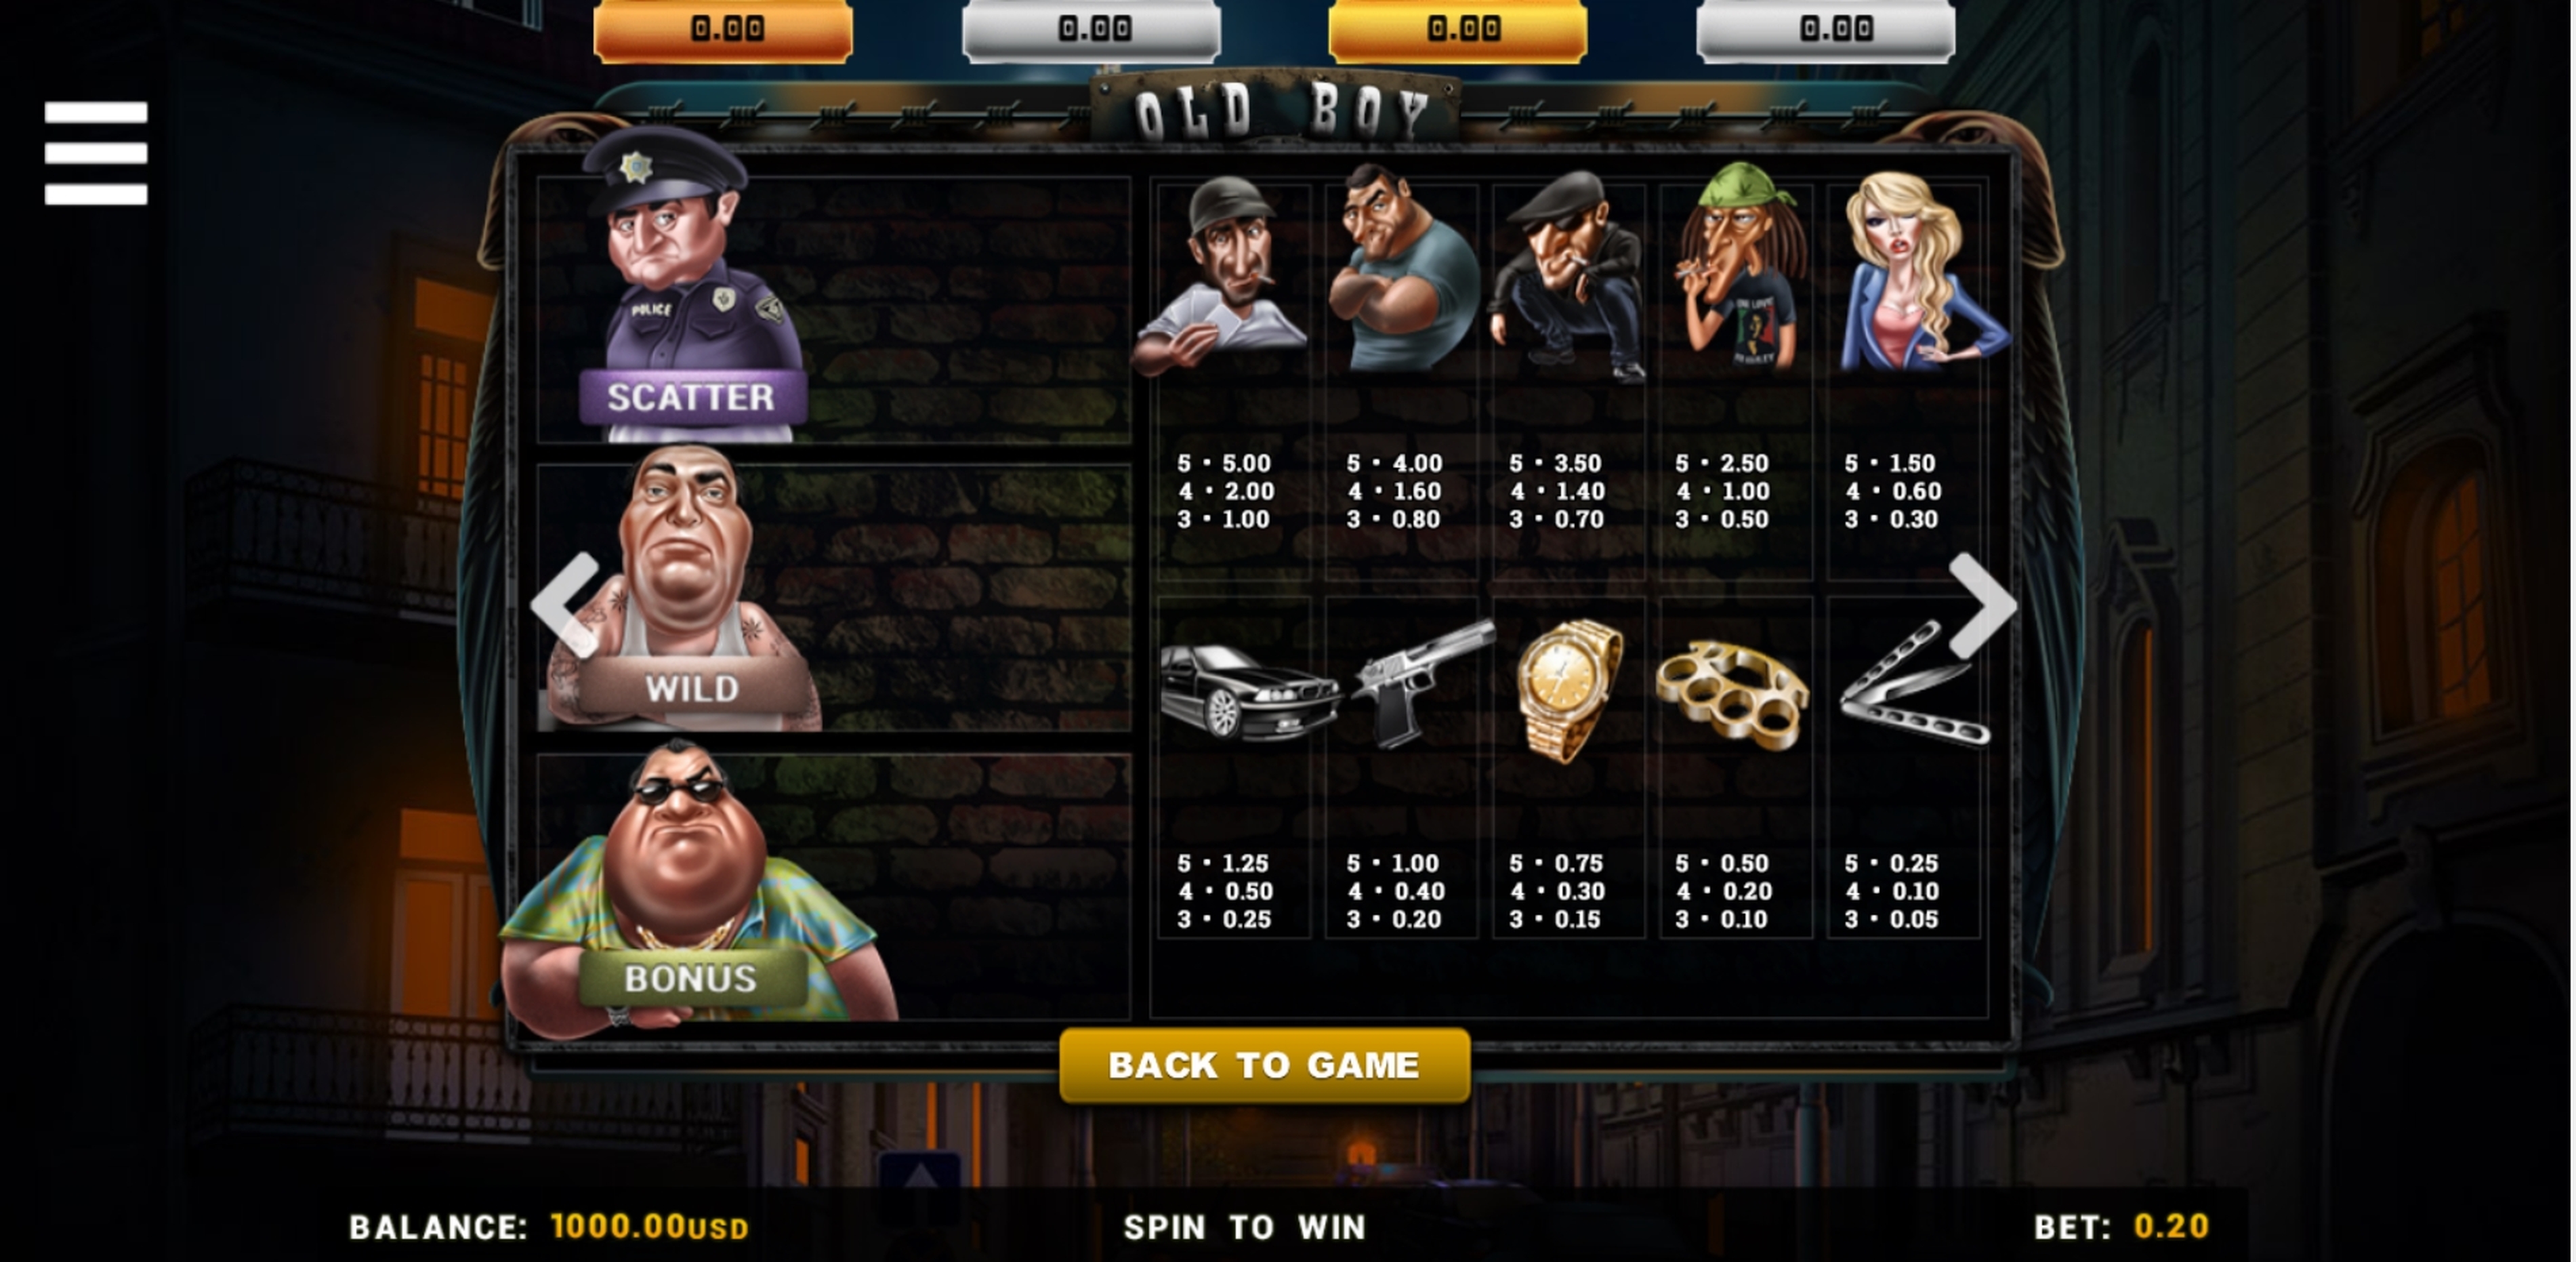 Info of Old Boy Slot Game by Betsense